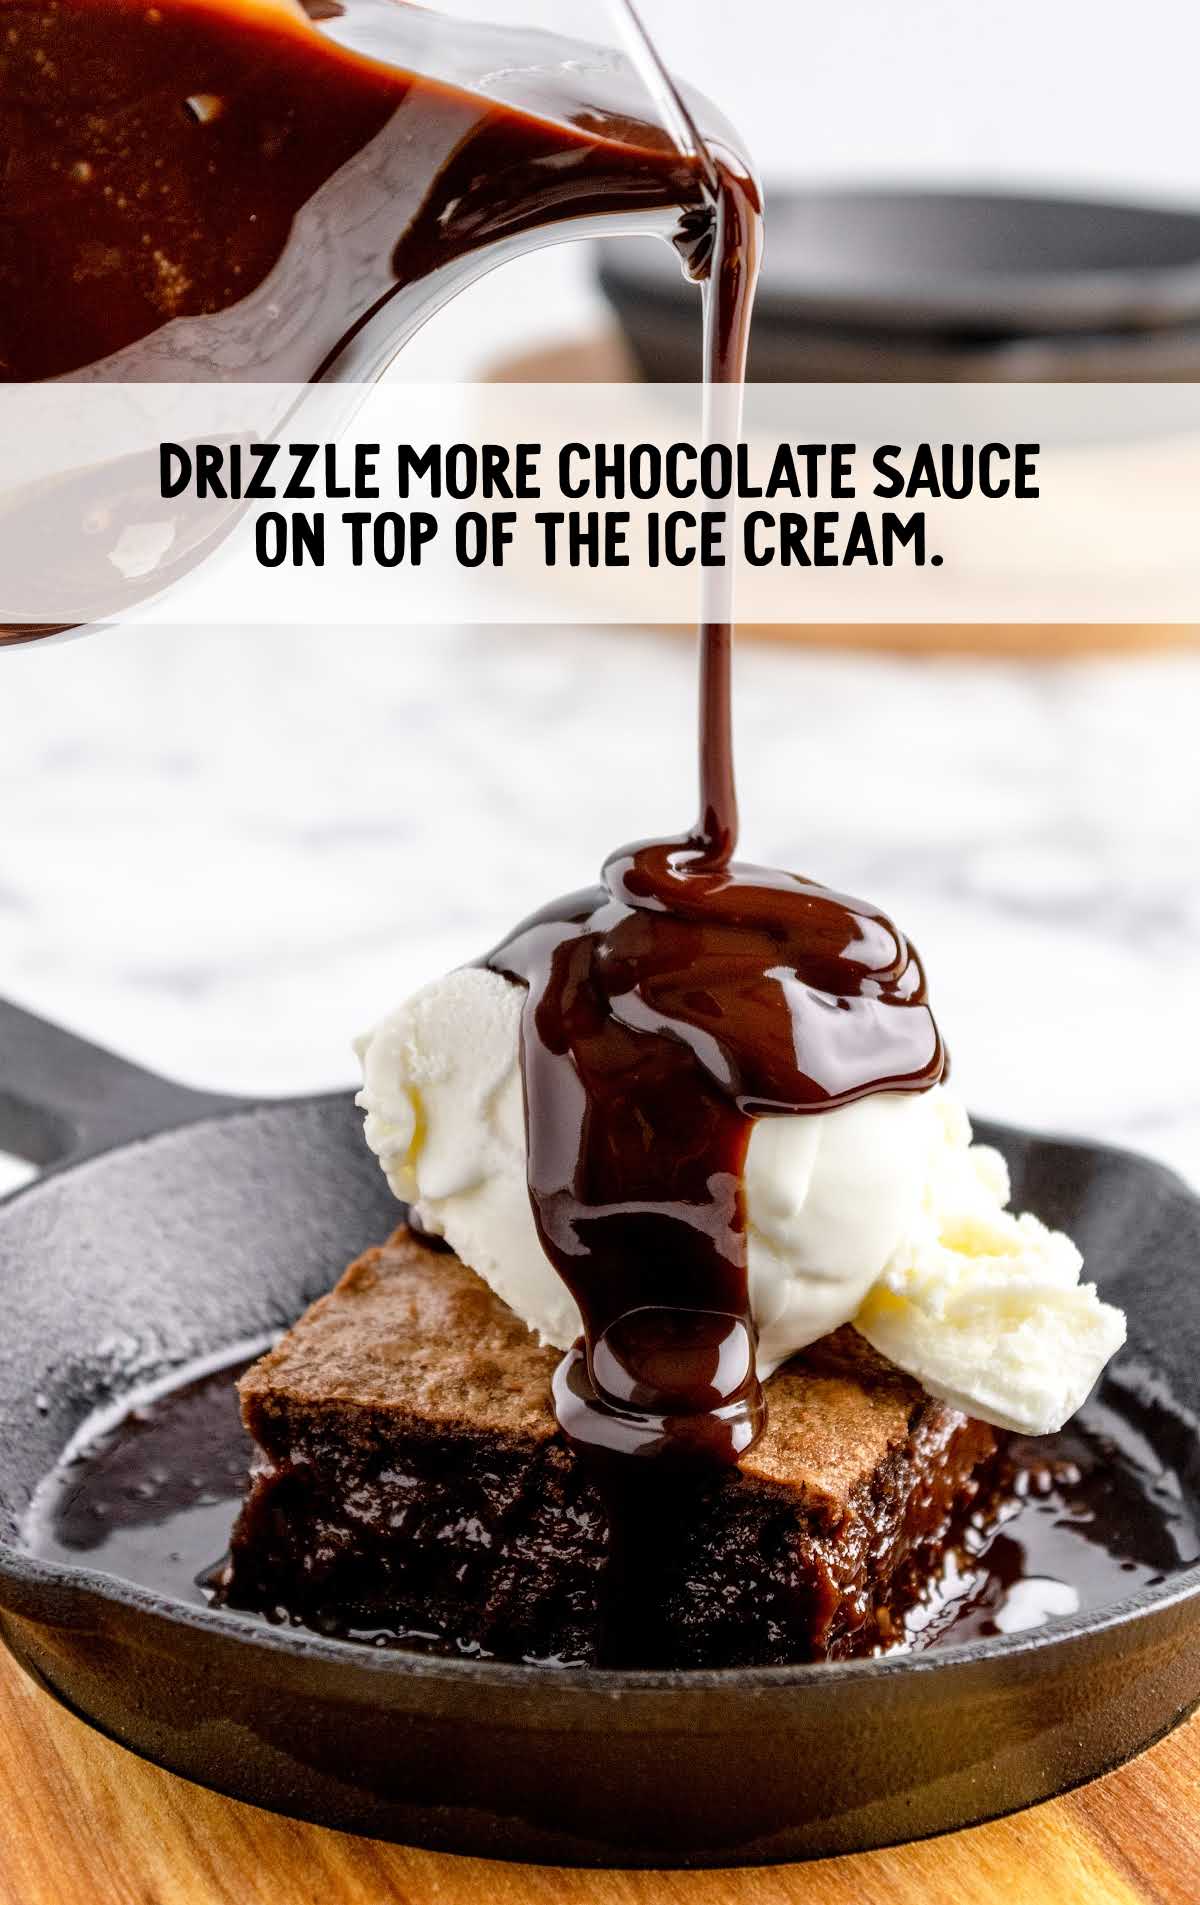 chocolate sauce drizzled on top of the ice cream